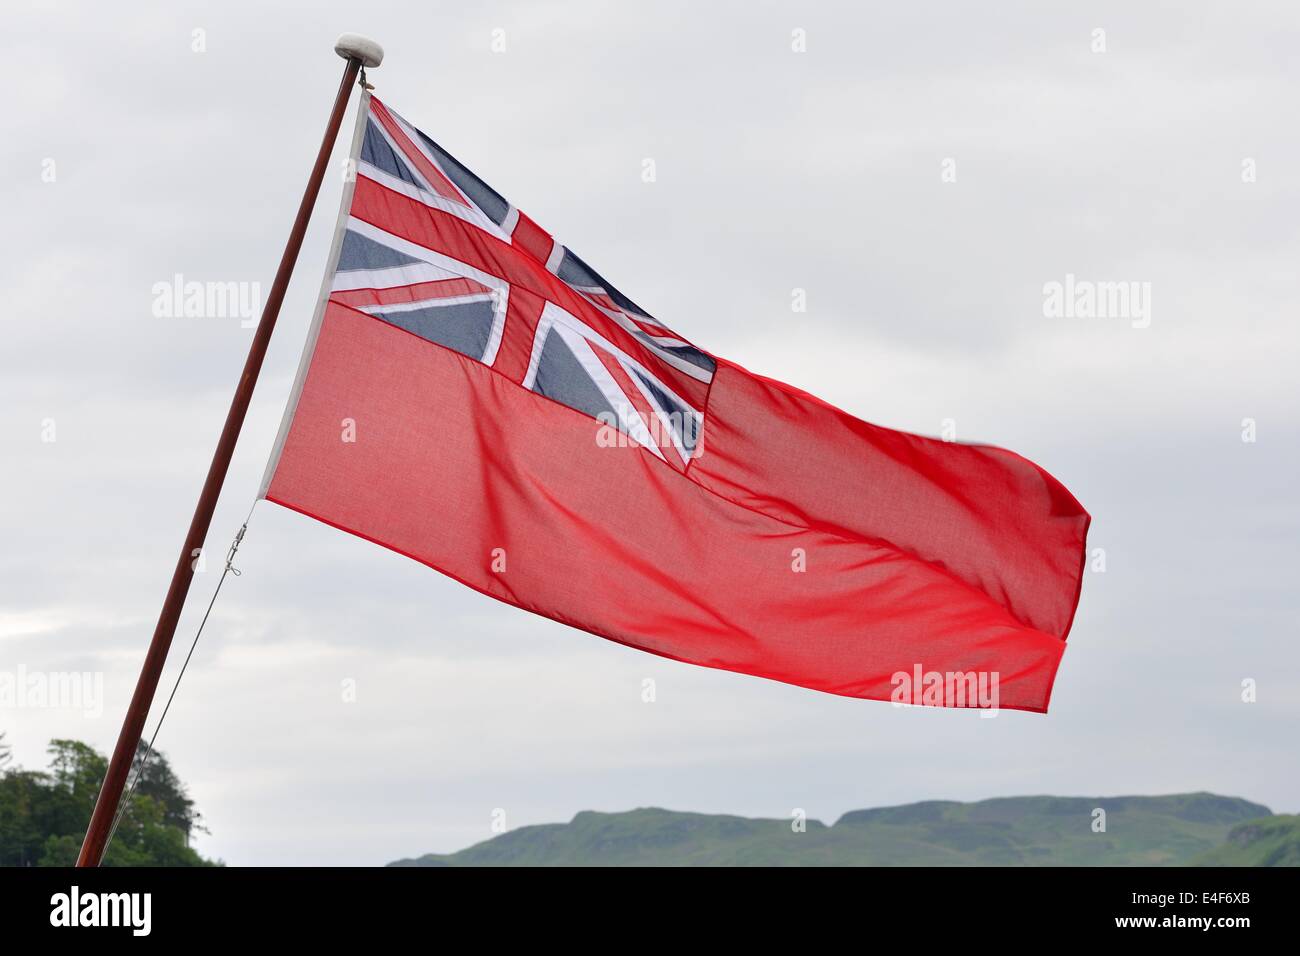 The Red Ensign, used by British civilian vessels. Stock Photo